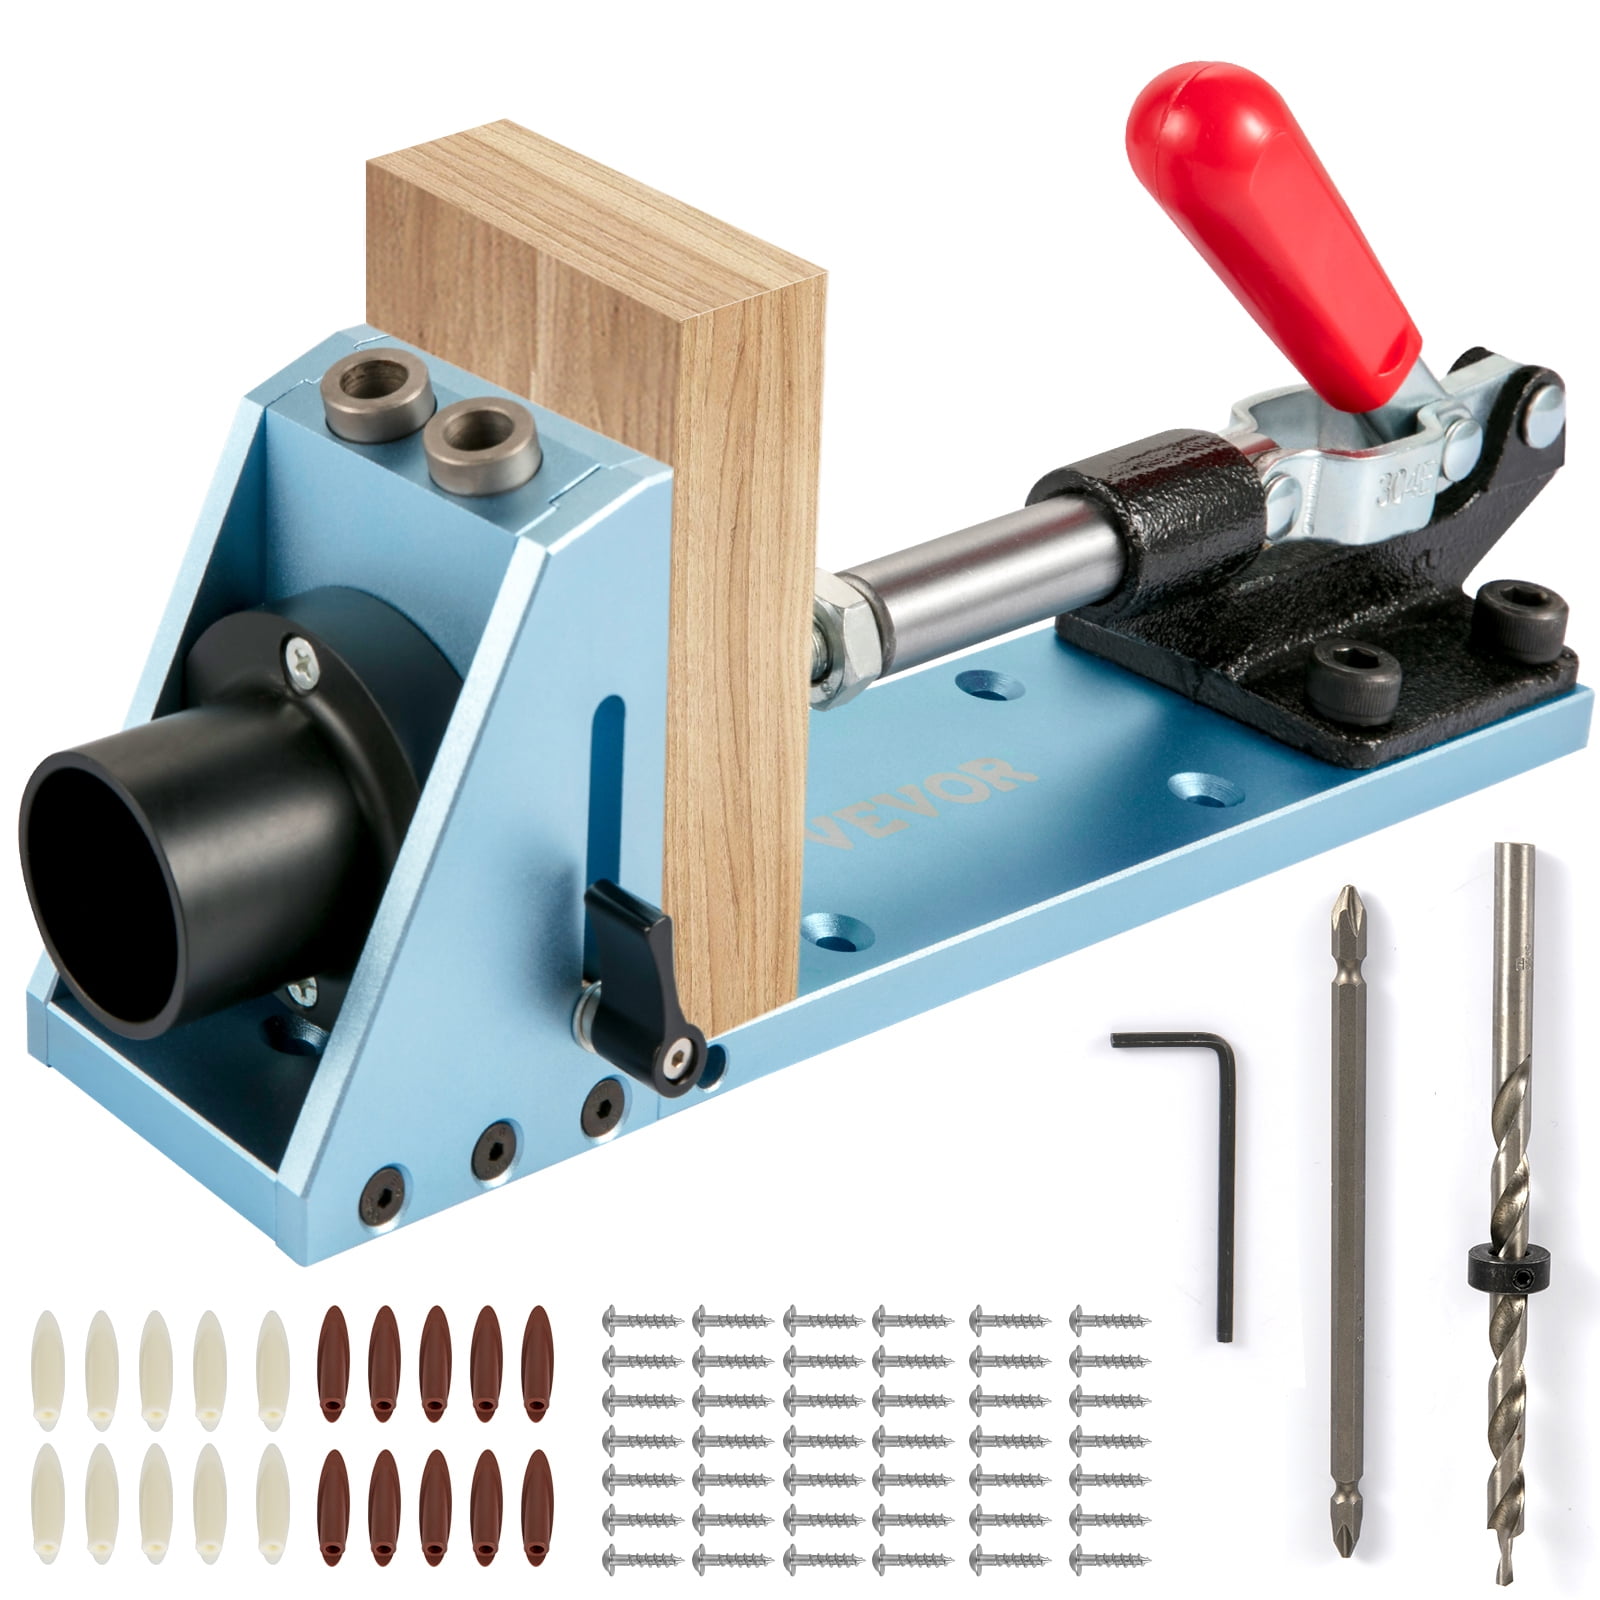 Simple Pocket Hole Jig System Drill Guide for Woodworking  Doweling Joinery # 